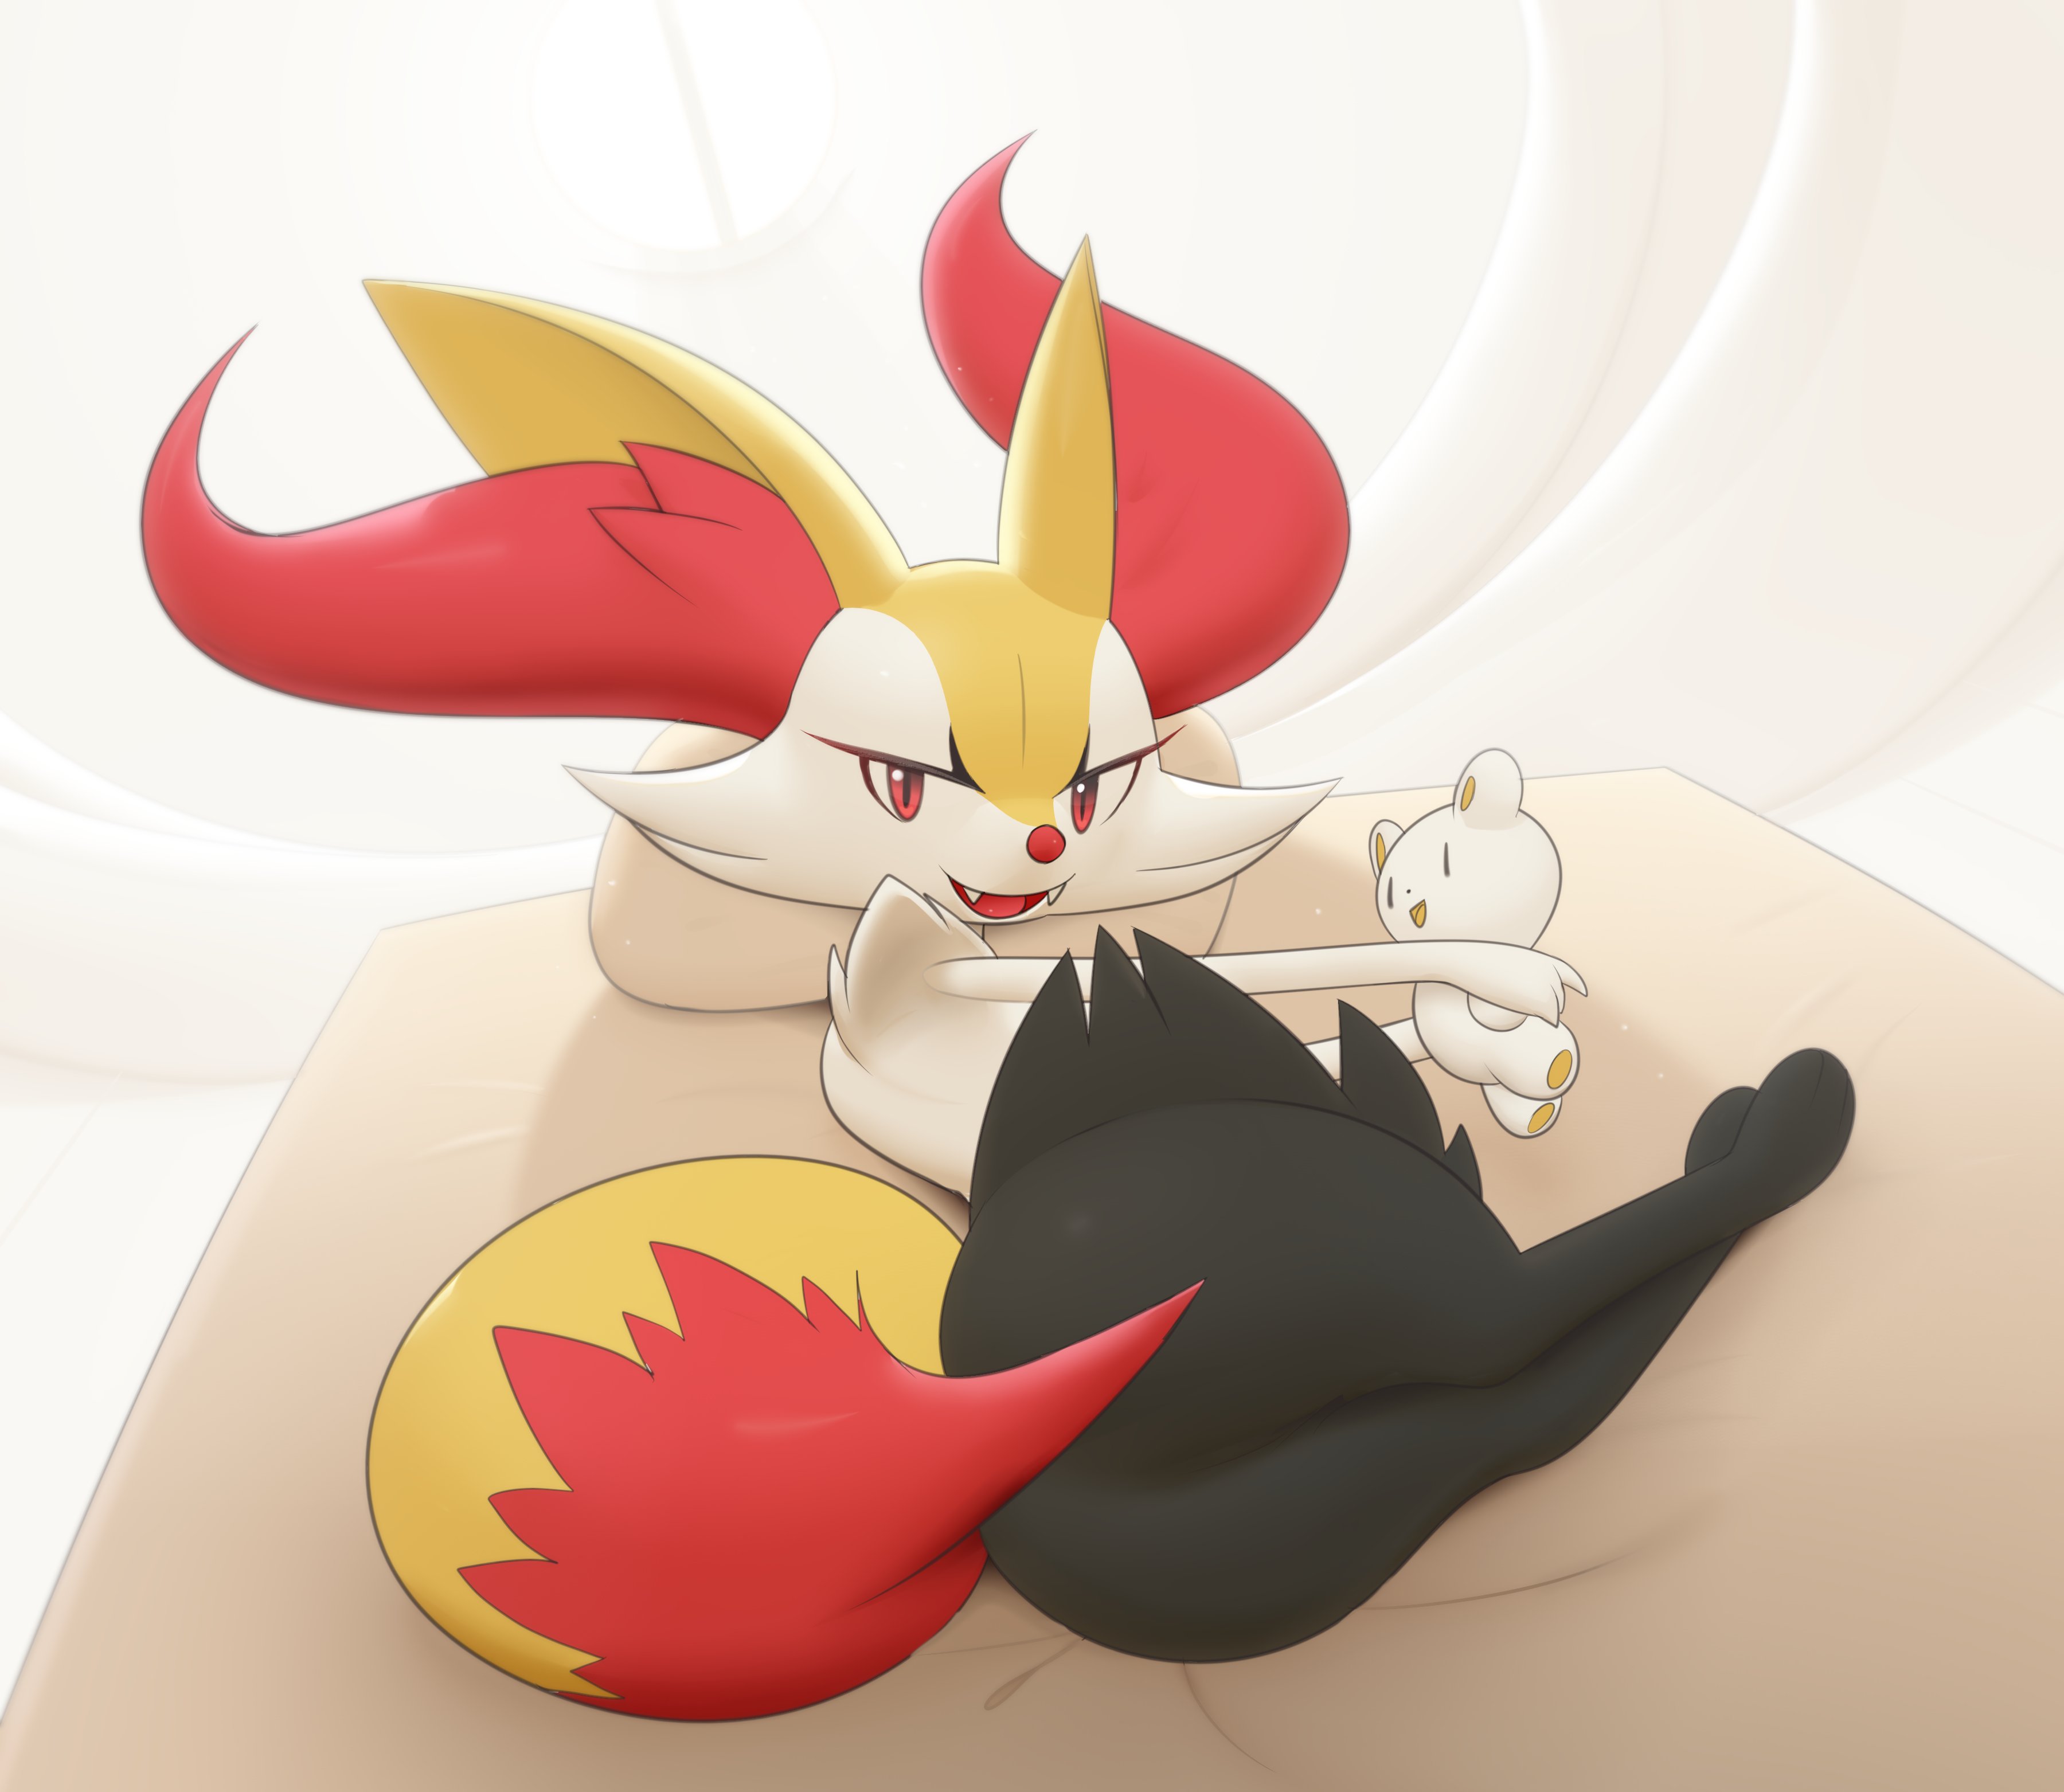 1. Braixen wants to Cuddle! 